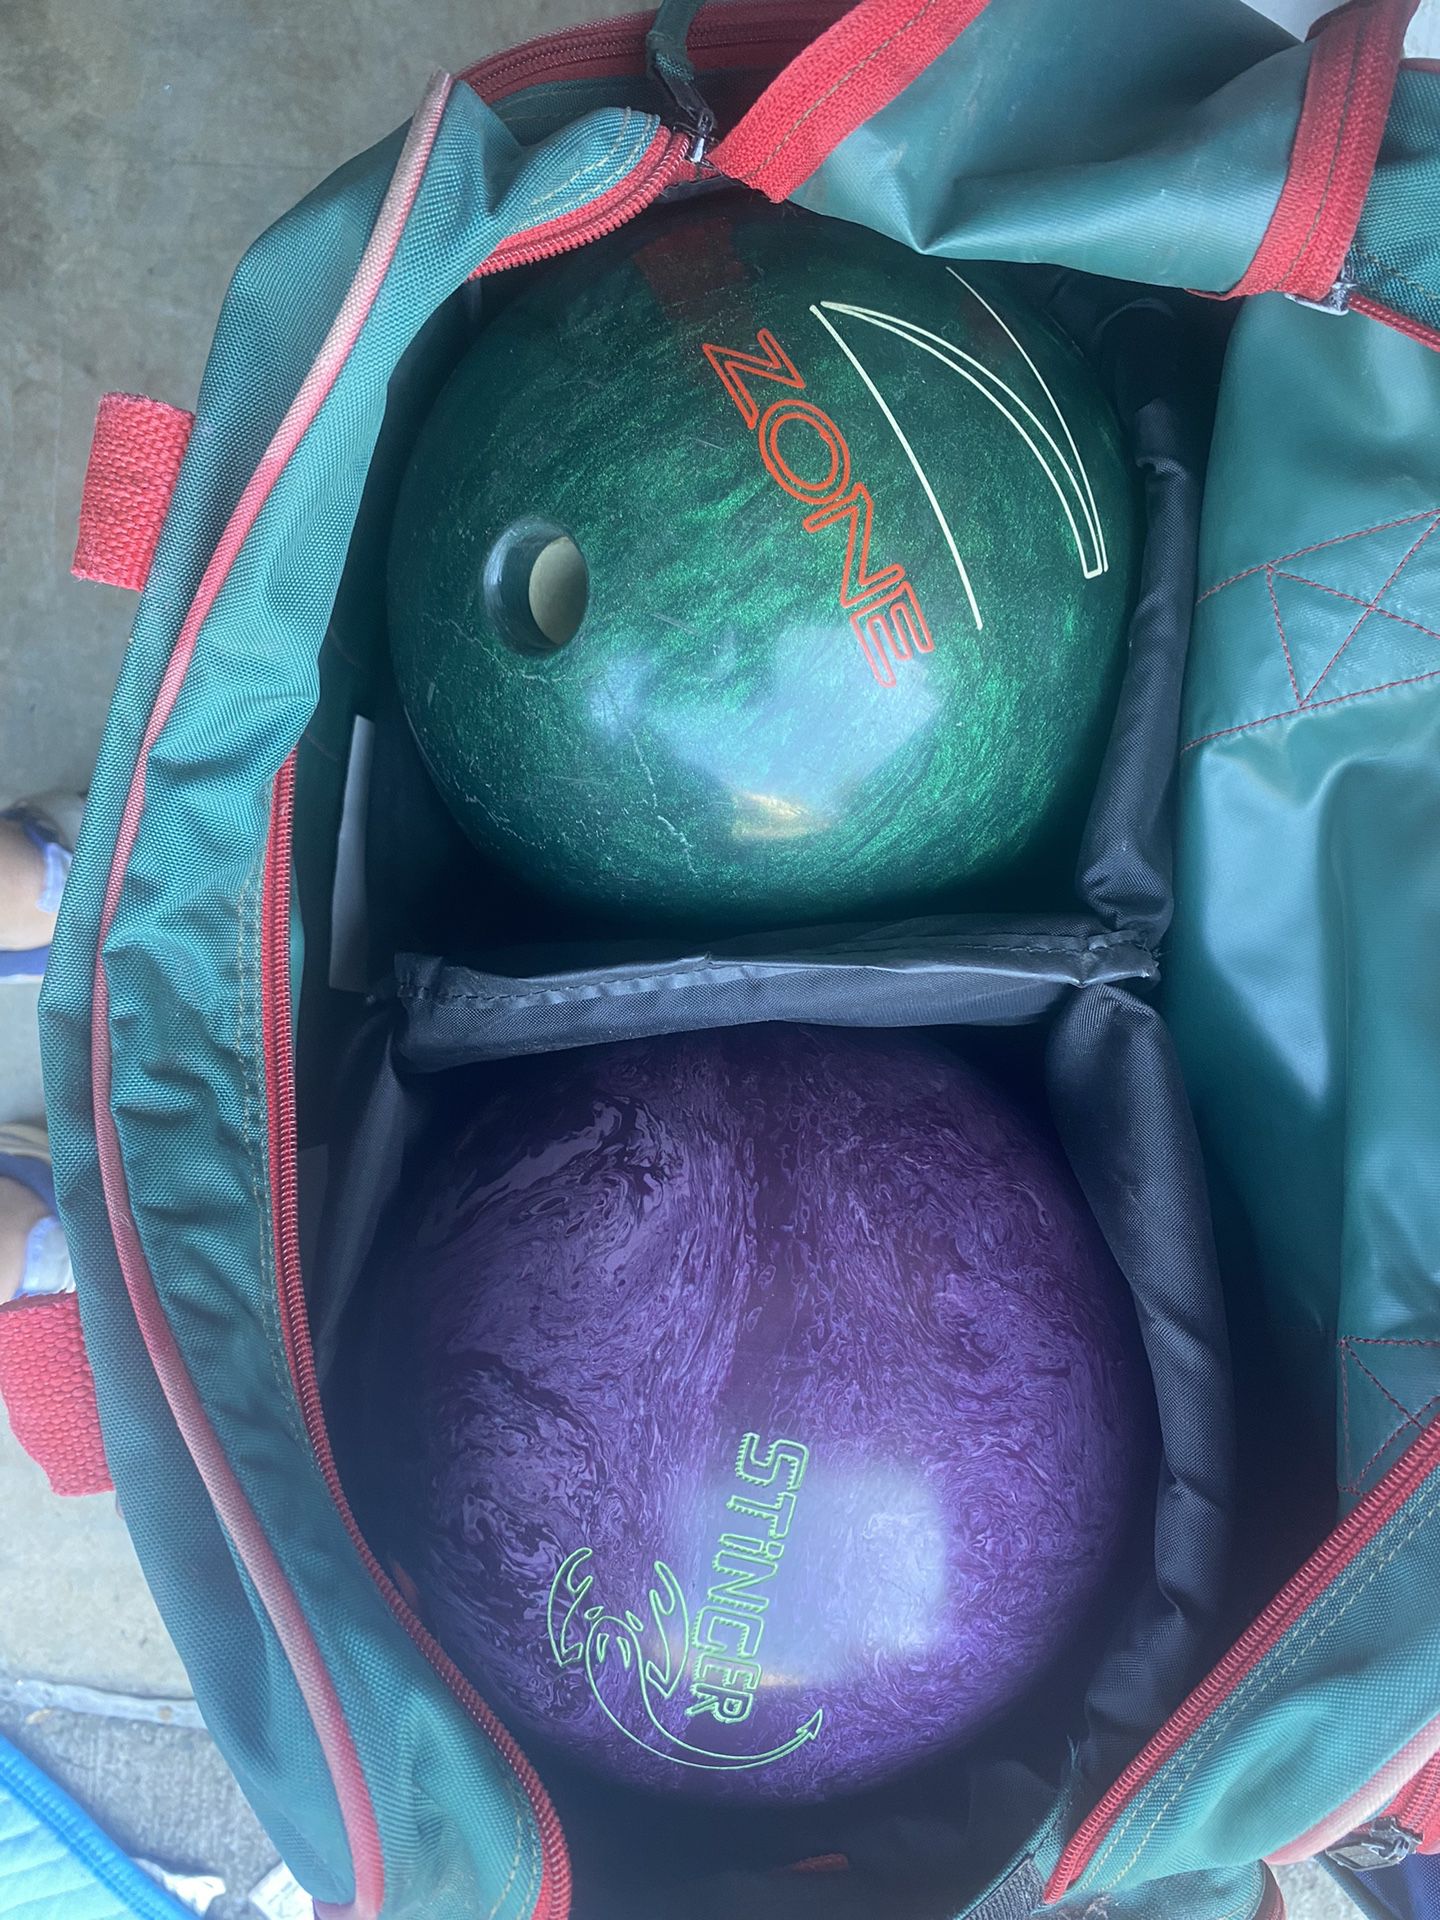 2 X 16lb  Bowling Balls In A Atlanta summer olympics duffel bag vintage 1996 Team USA traveler luggage with detachable insulated lunch bag